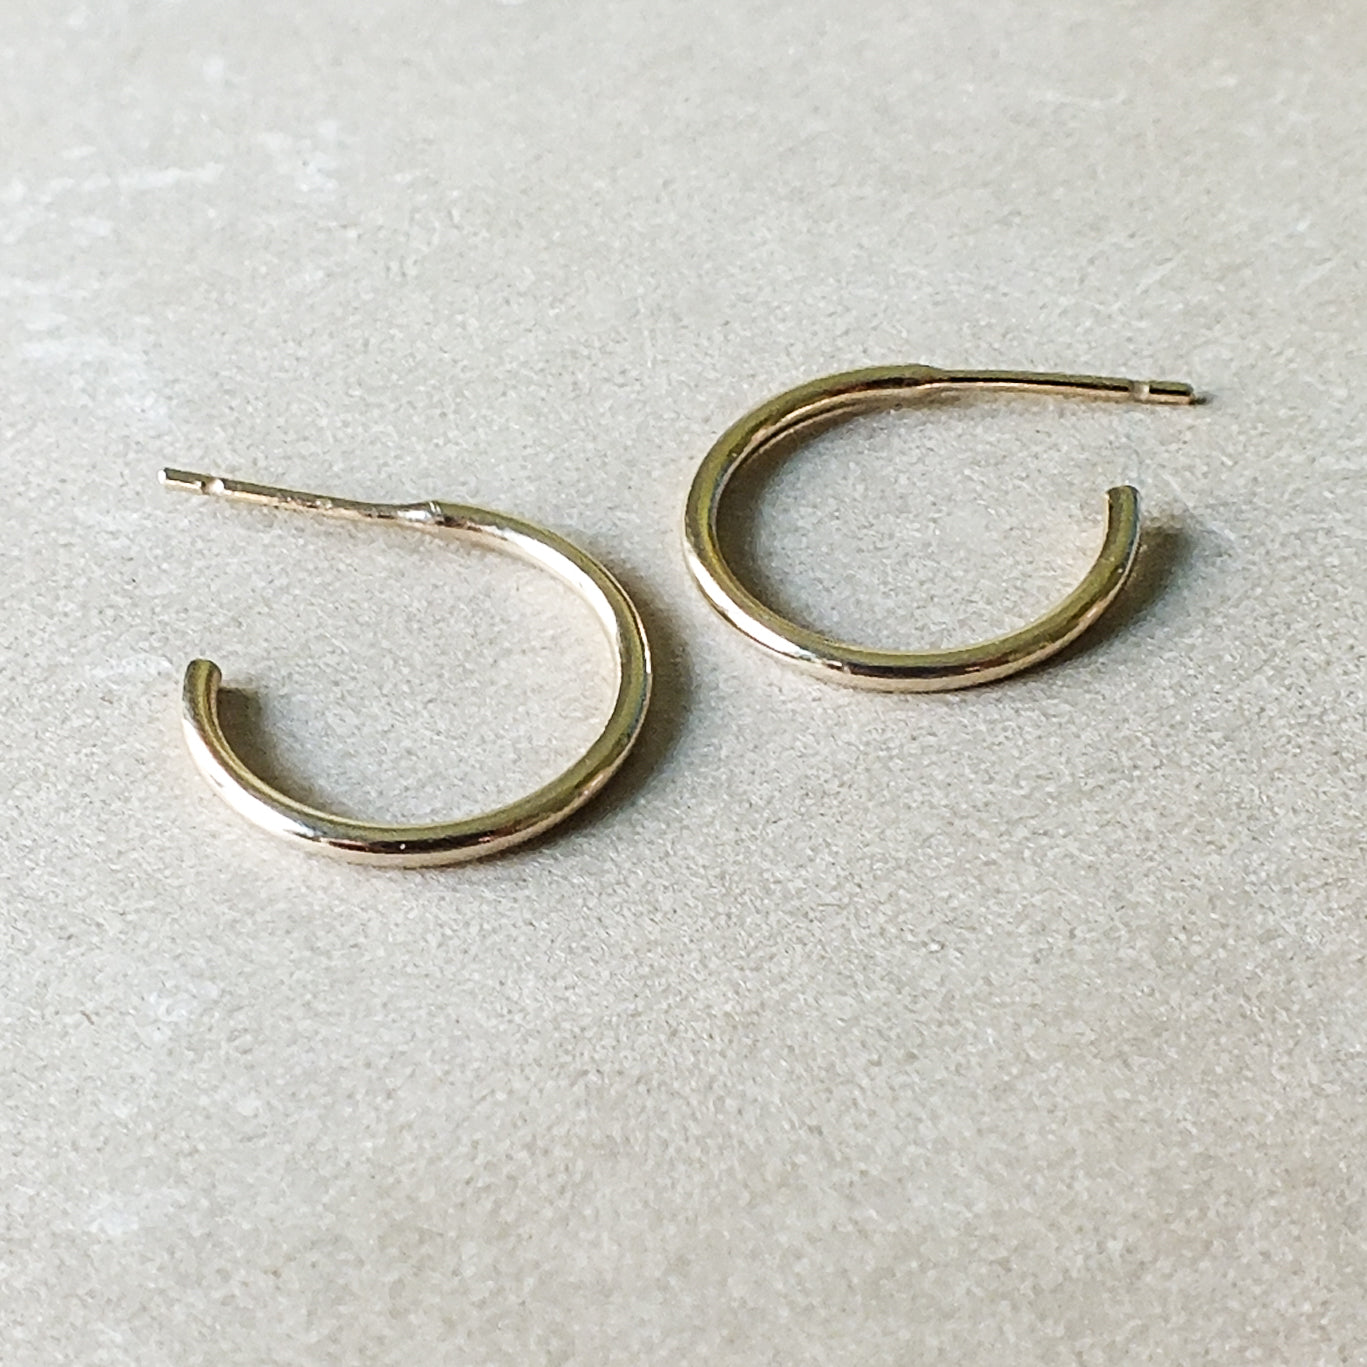 A pair of medium-sized, dainty Becoming Jewelry Open Hoop Earrings on a gray surface.